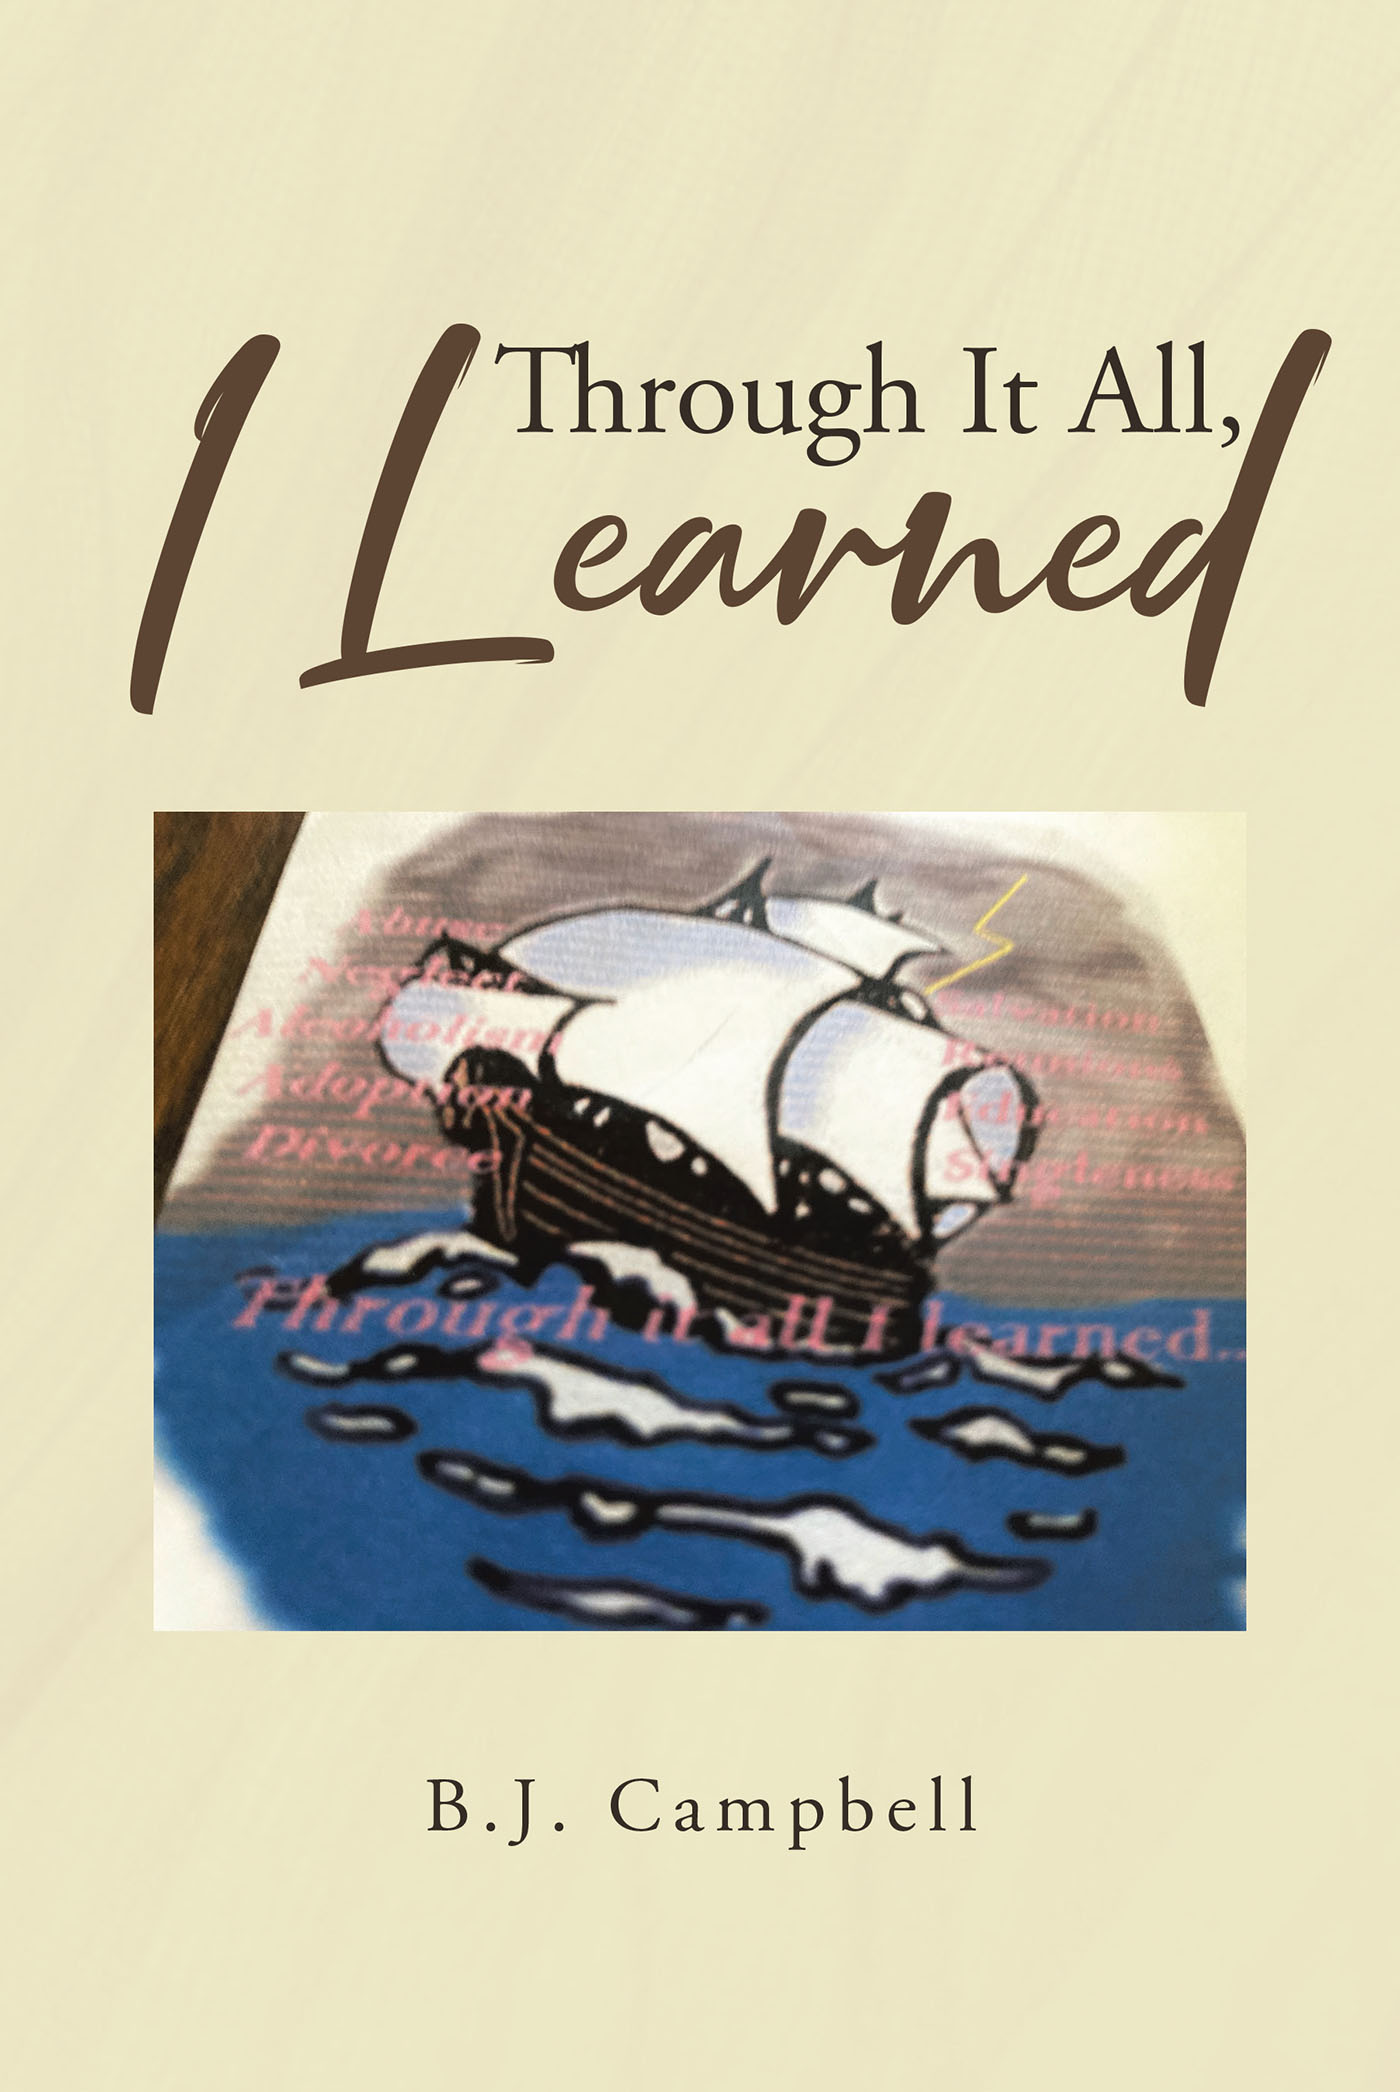 B.J. Campbell’s New Book, "Through It All, I Learned," is a Gripping Faith-Based Read About Breaking Free from the Cycle of Abuse Through God’s Grace and Mercy